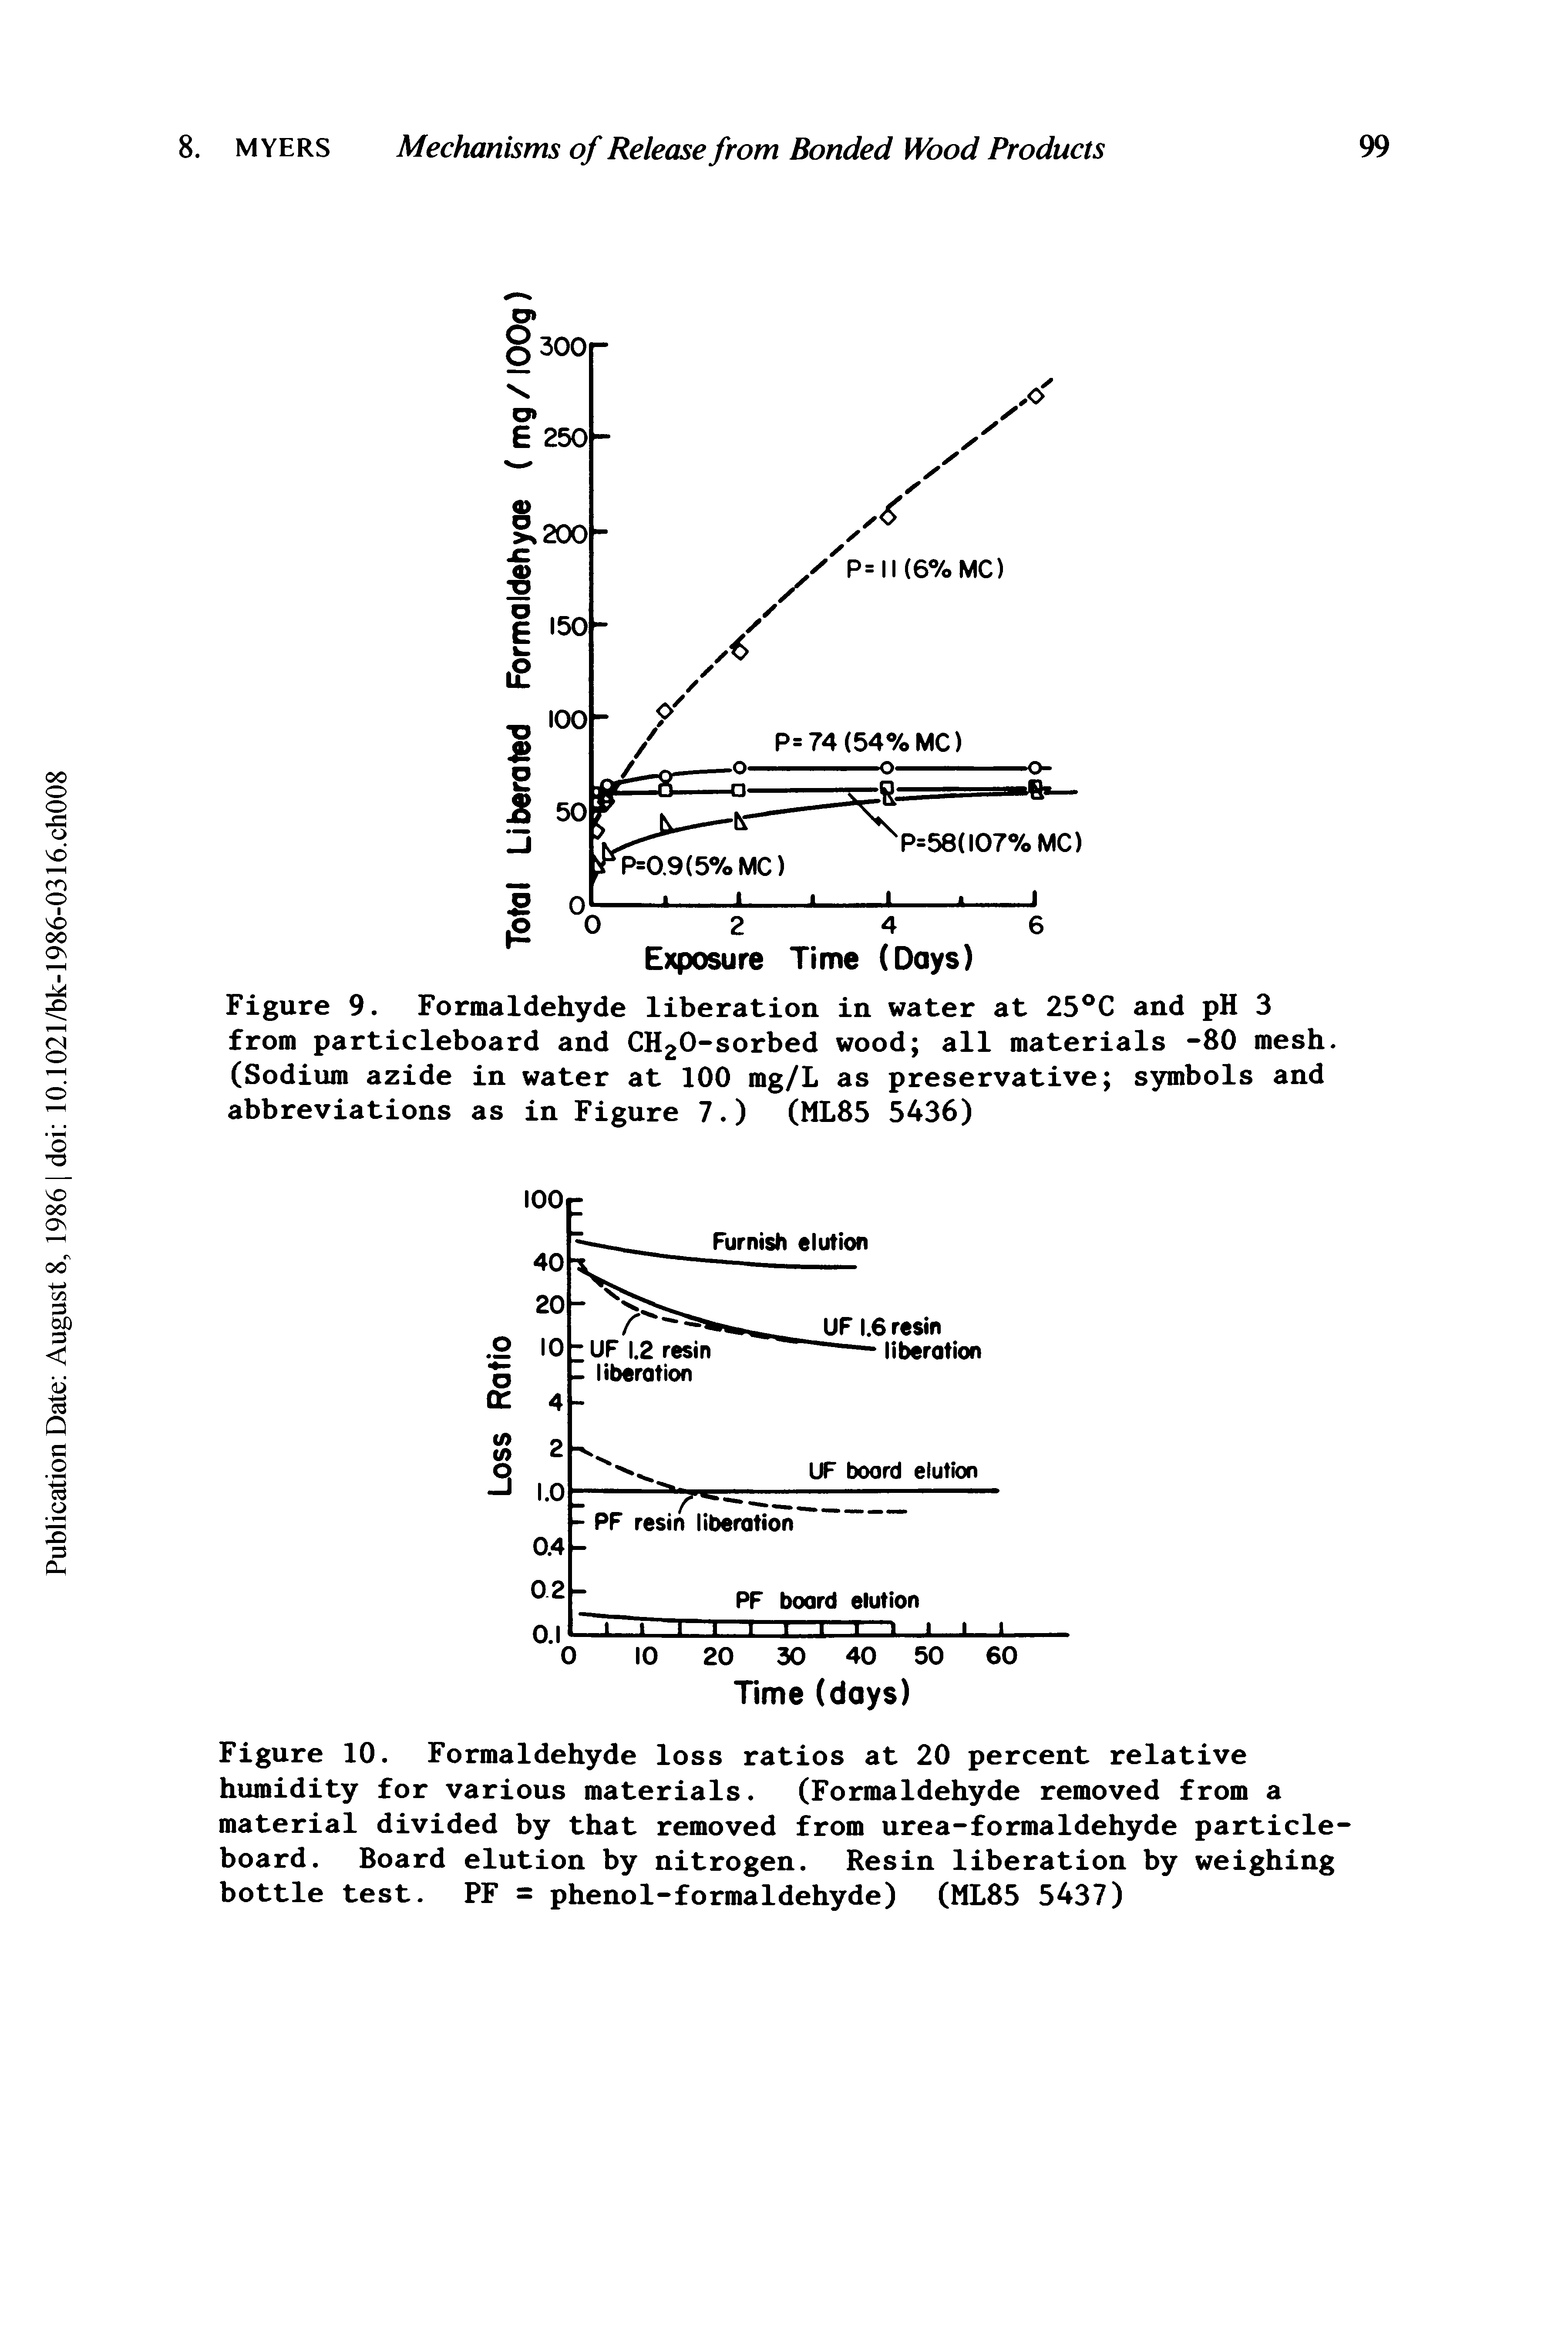 Figure 10. Formaldehyde loss ratios at 20 percent relative humidity for various materials. (Formaldehyde removed from a material divided by that removed from urea-formaldehyde particleboard. Board elution by nitrogen. Resin liberation by weighing bottle test. PF = phenol-formaldehyde) (ML85 5437)...